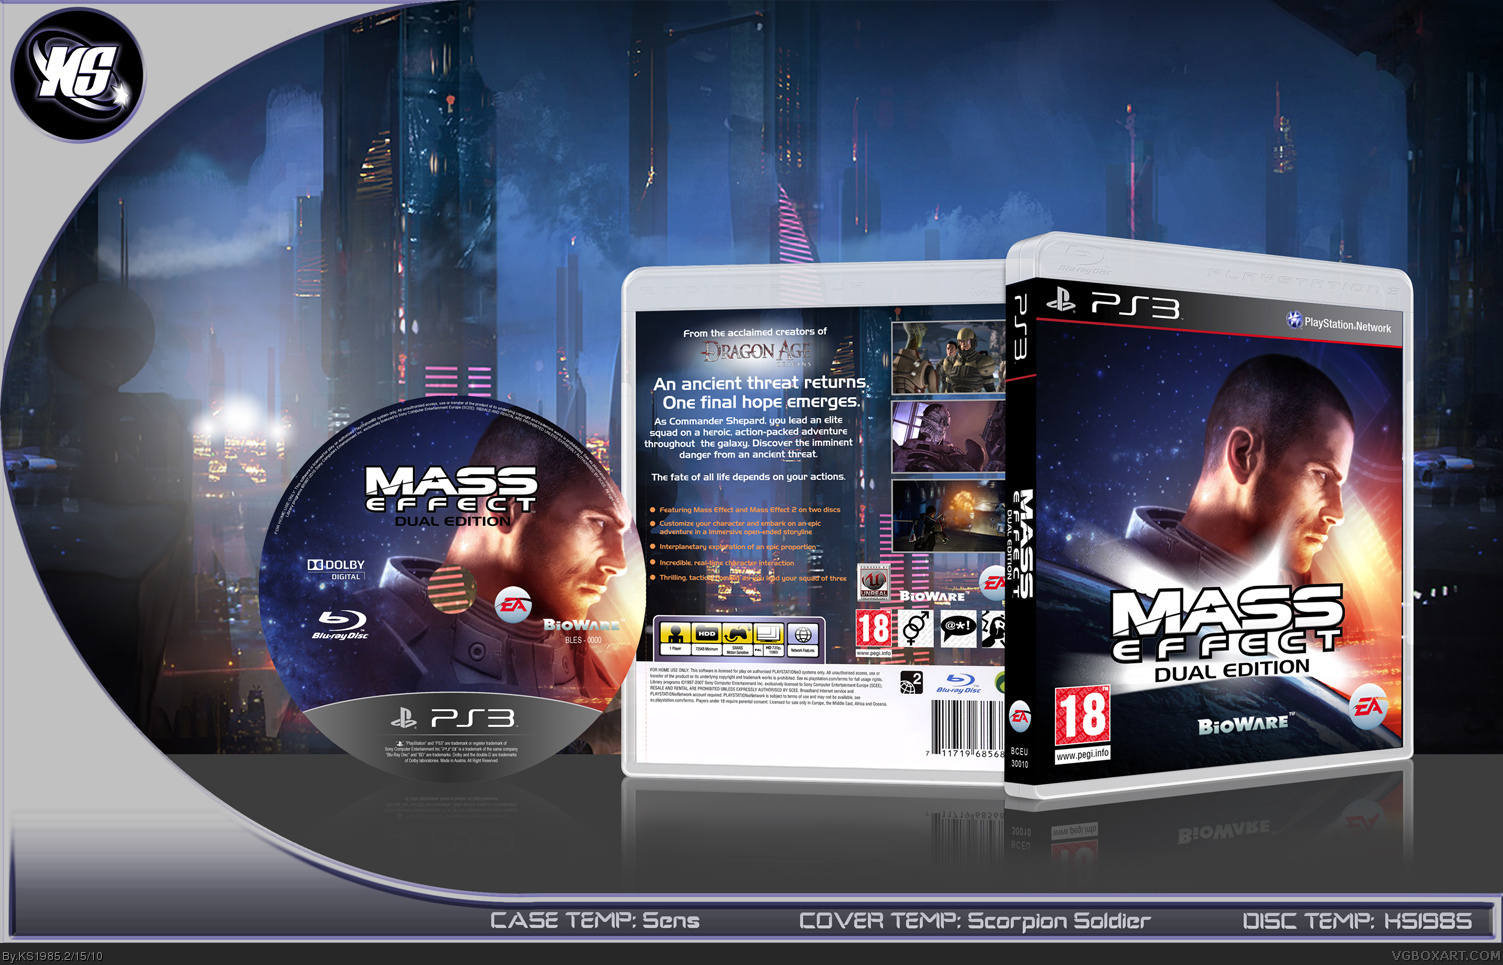 Mass Effect: Dual Edition box cover